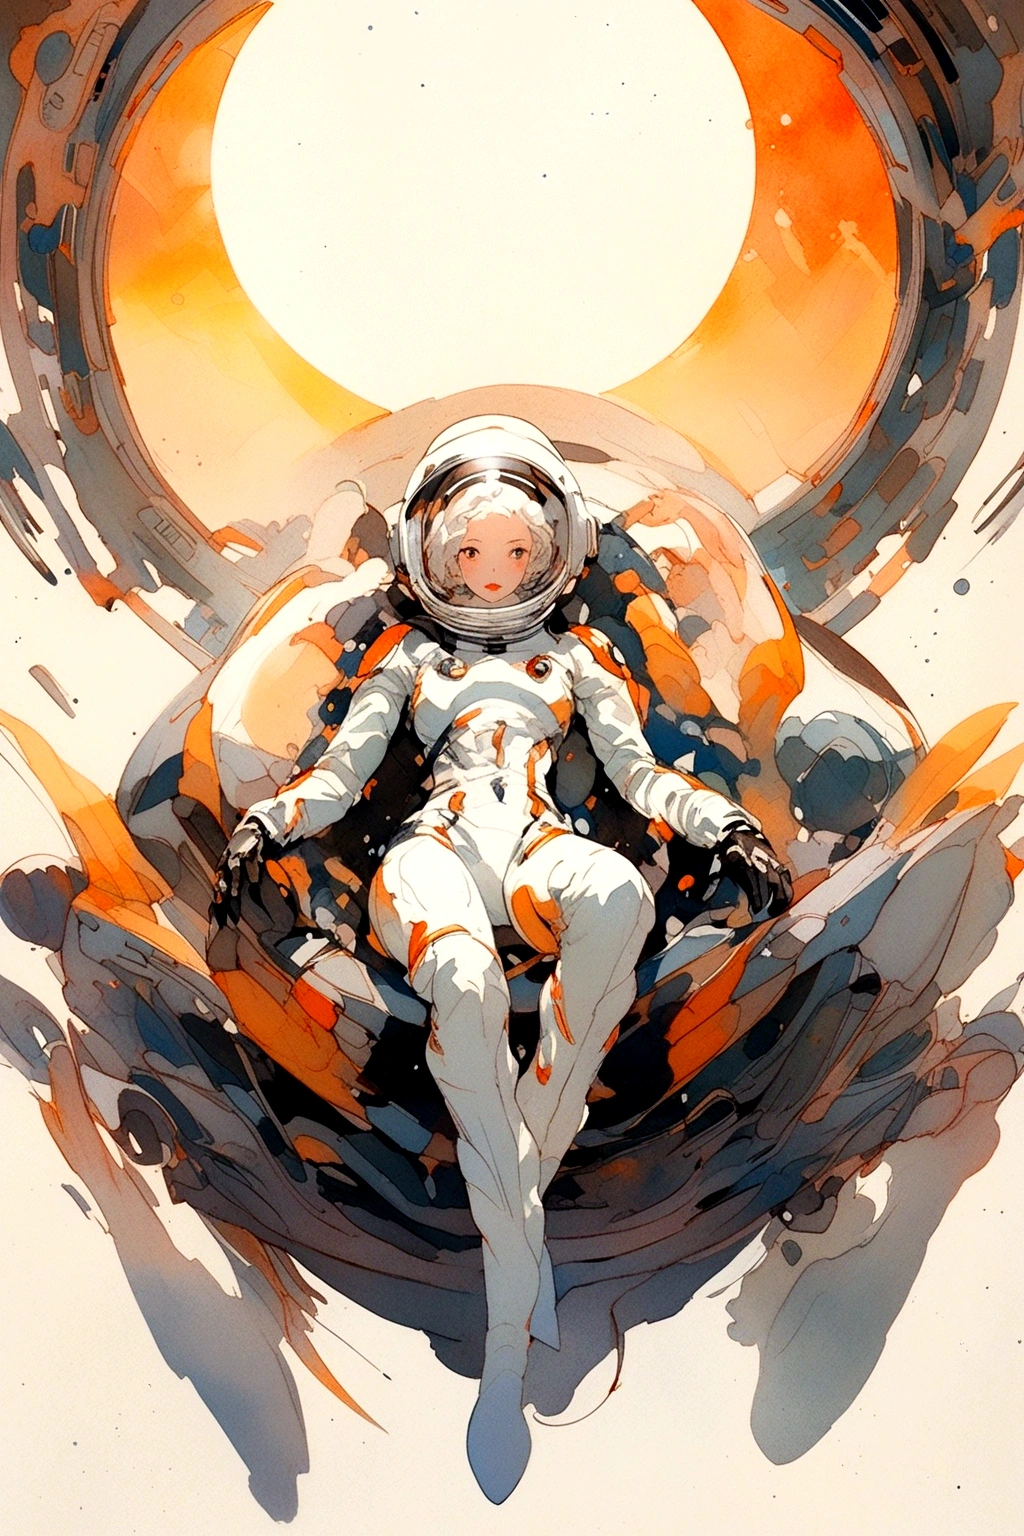 (Masterpiece: 1.2, Highest Quality), One Girl,, Change, Slim, Classic spacesuit, (, Bottomless, Naked Pussy),Astronaut, Sitting in Black Chair, Spreading Legs, Serious, Spaceship, Futuristic, Science Fiction, Space Age Design, Anime Minimalist, Watercolor, Influenced by Bauhaus 、Clothes in which the nipples are visible   